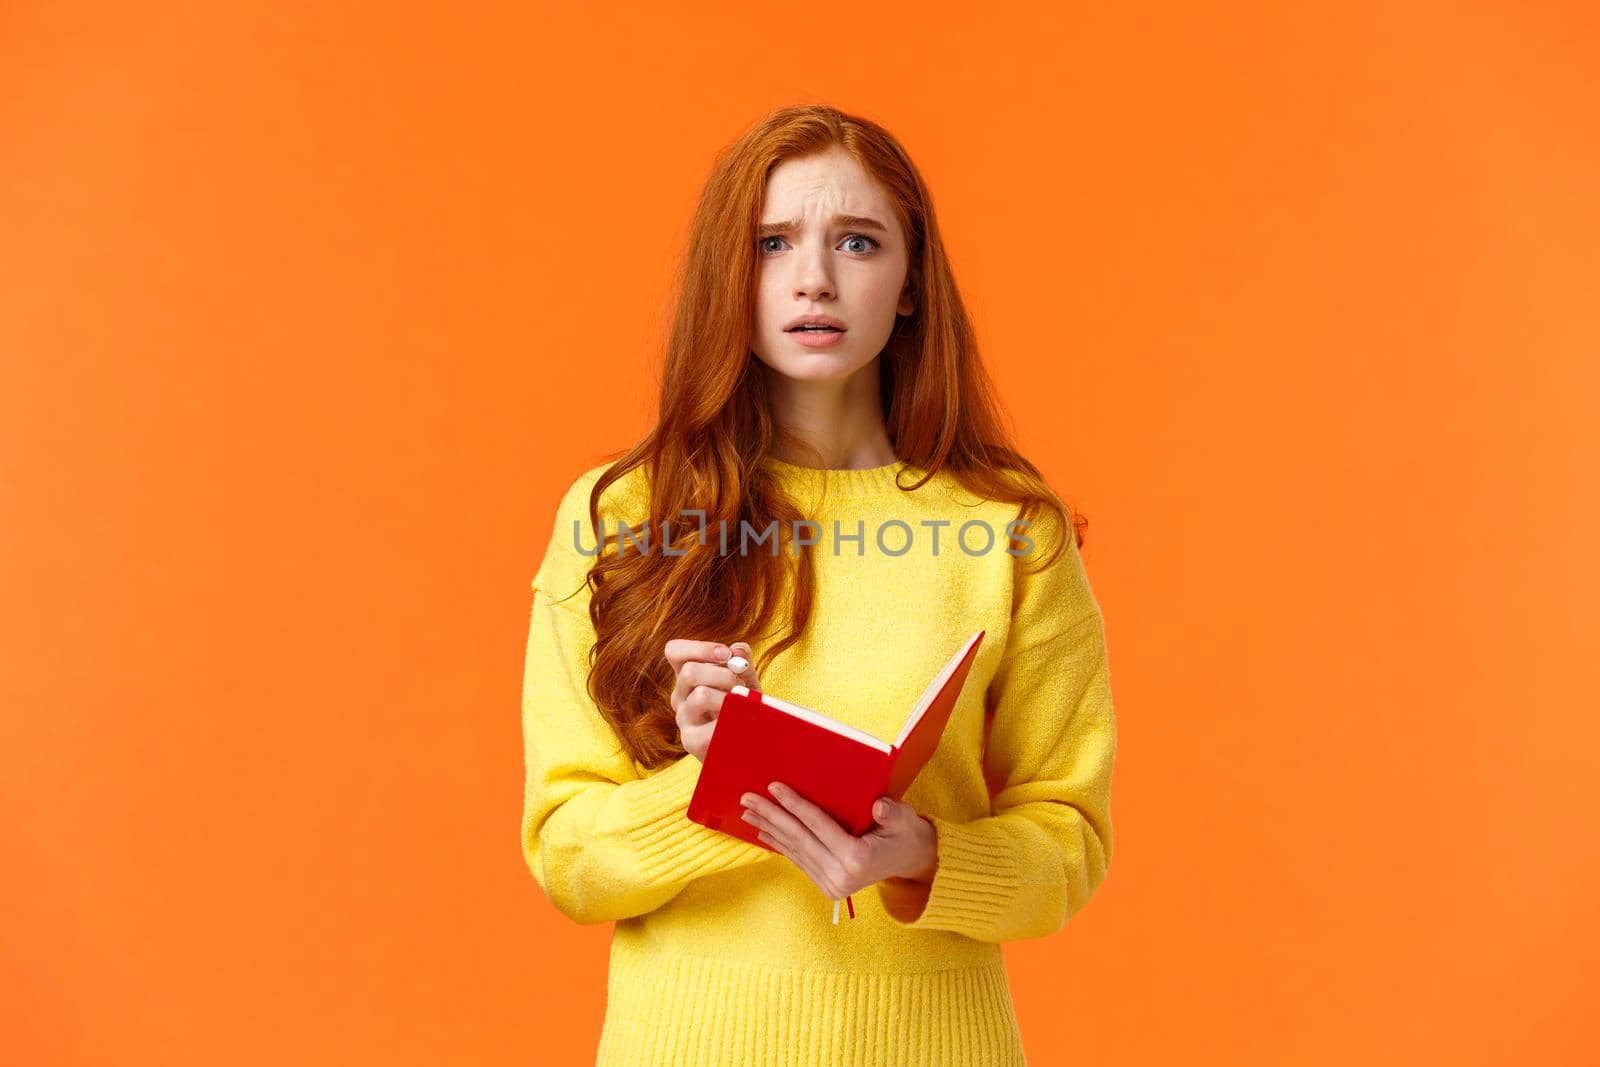 Concerned tensed attractive redhead female student cant write down everything from blackboard after lector, biting lip look troubled and perplexed, holding red notebook and pen, orange background.